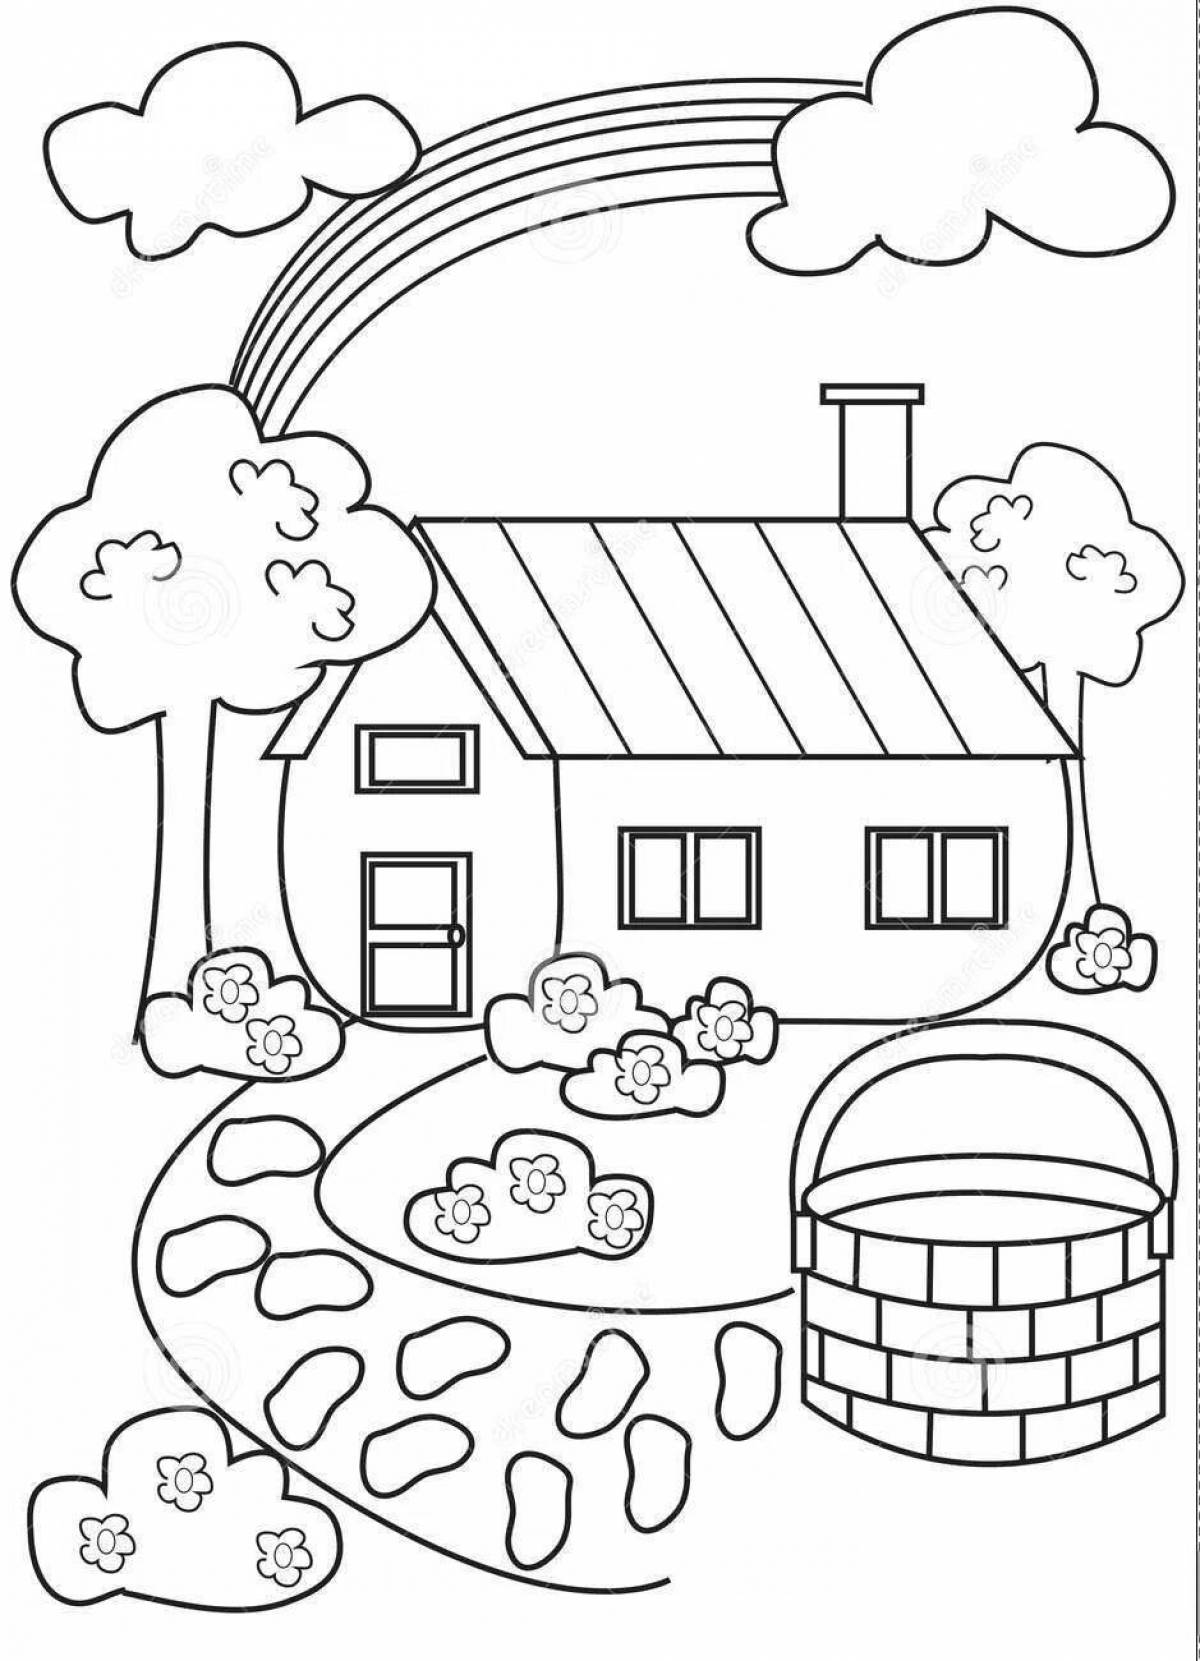 Coloring page festive rainbow house